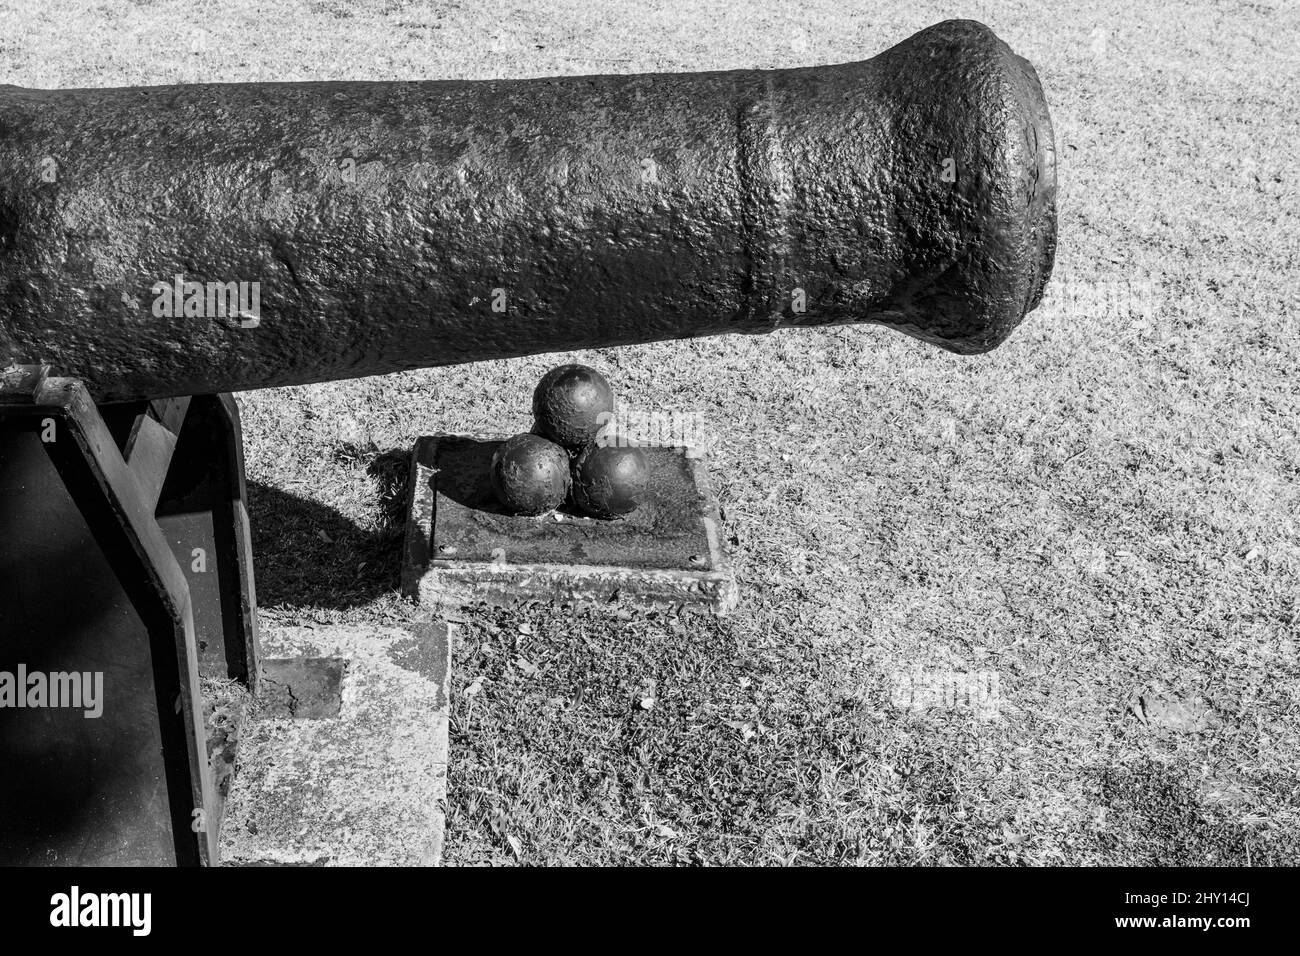 Grayscale shot of a vintage metal cannon with metal balls on the ground on a sunny day Stock Photo